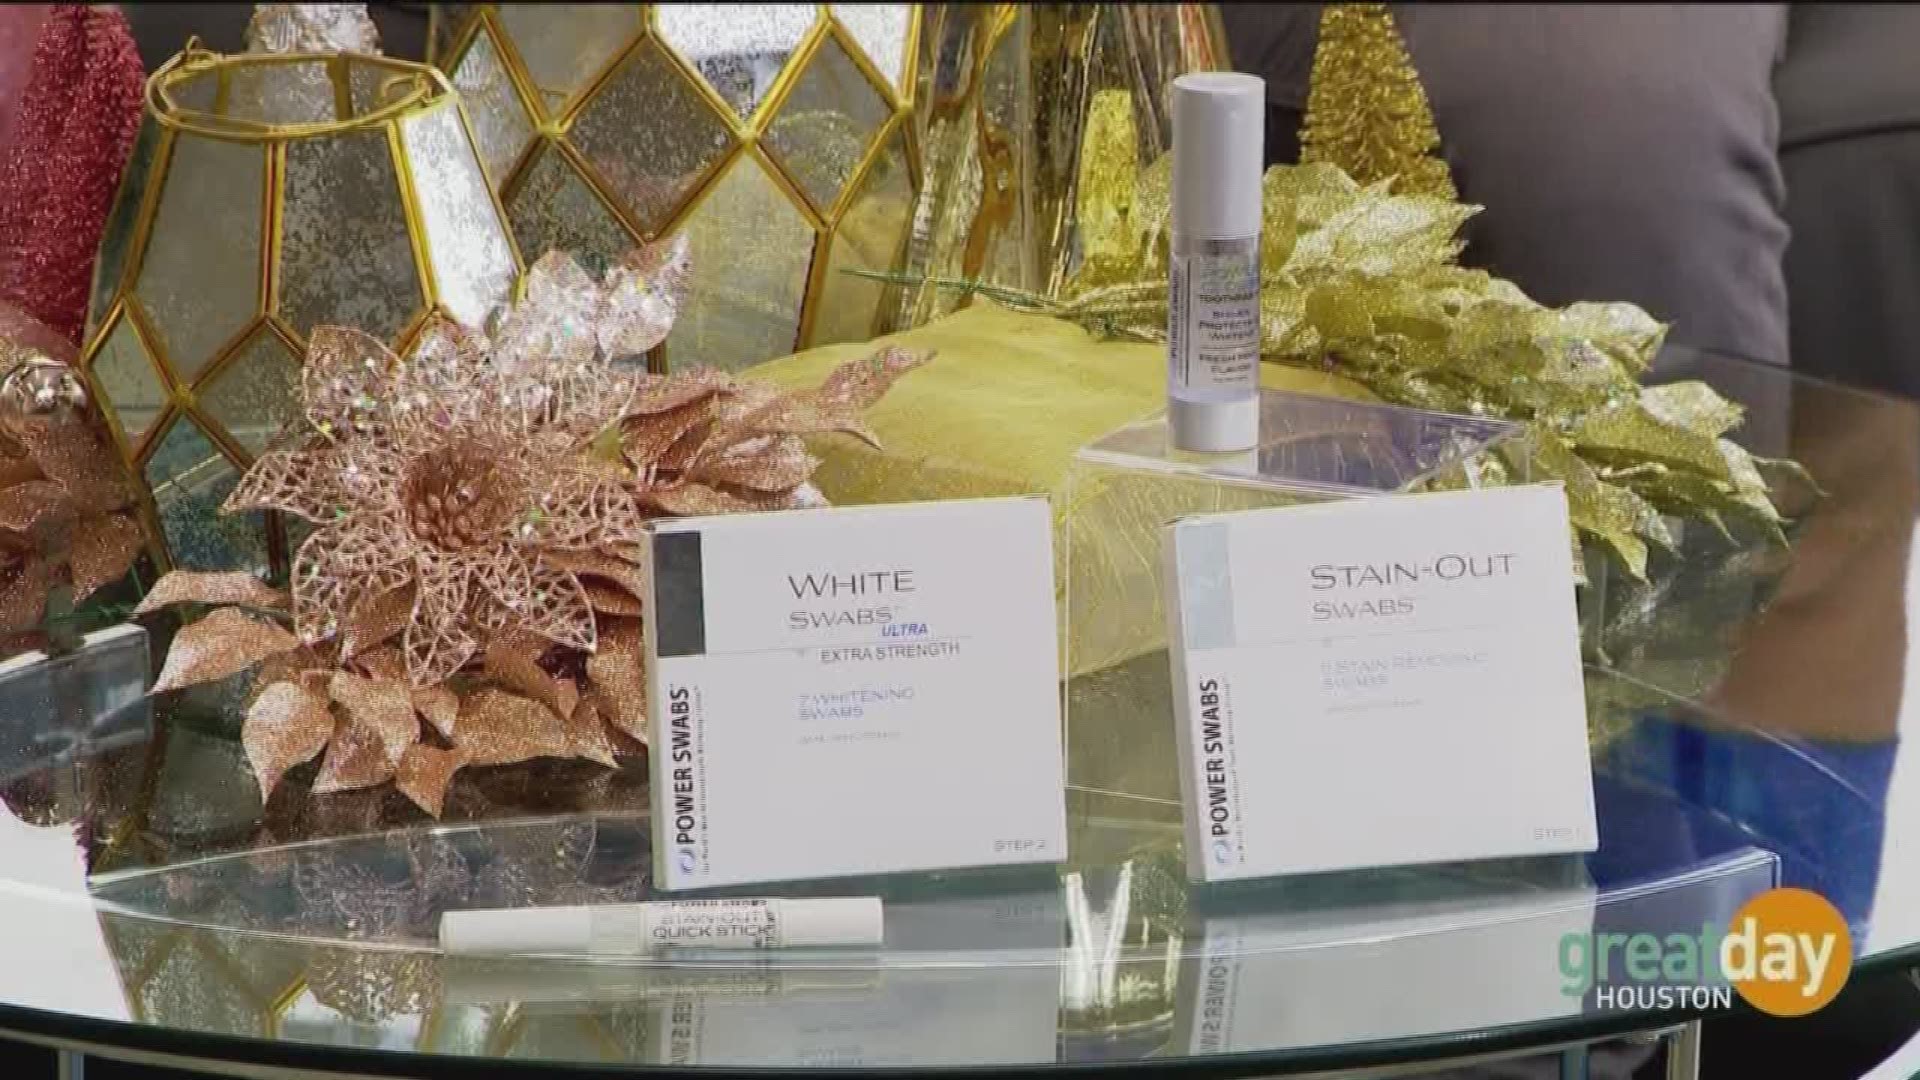 Lifestyle Expert Scott DeFalco demonstrates how Power Swabs can give you whiter teeth in minutes.